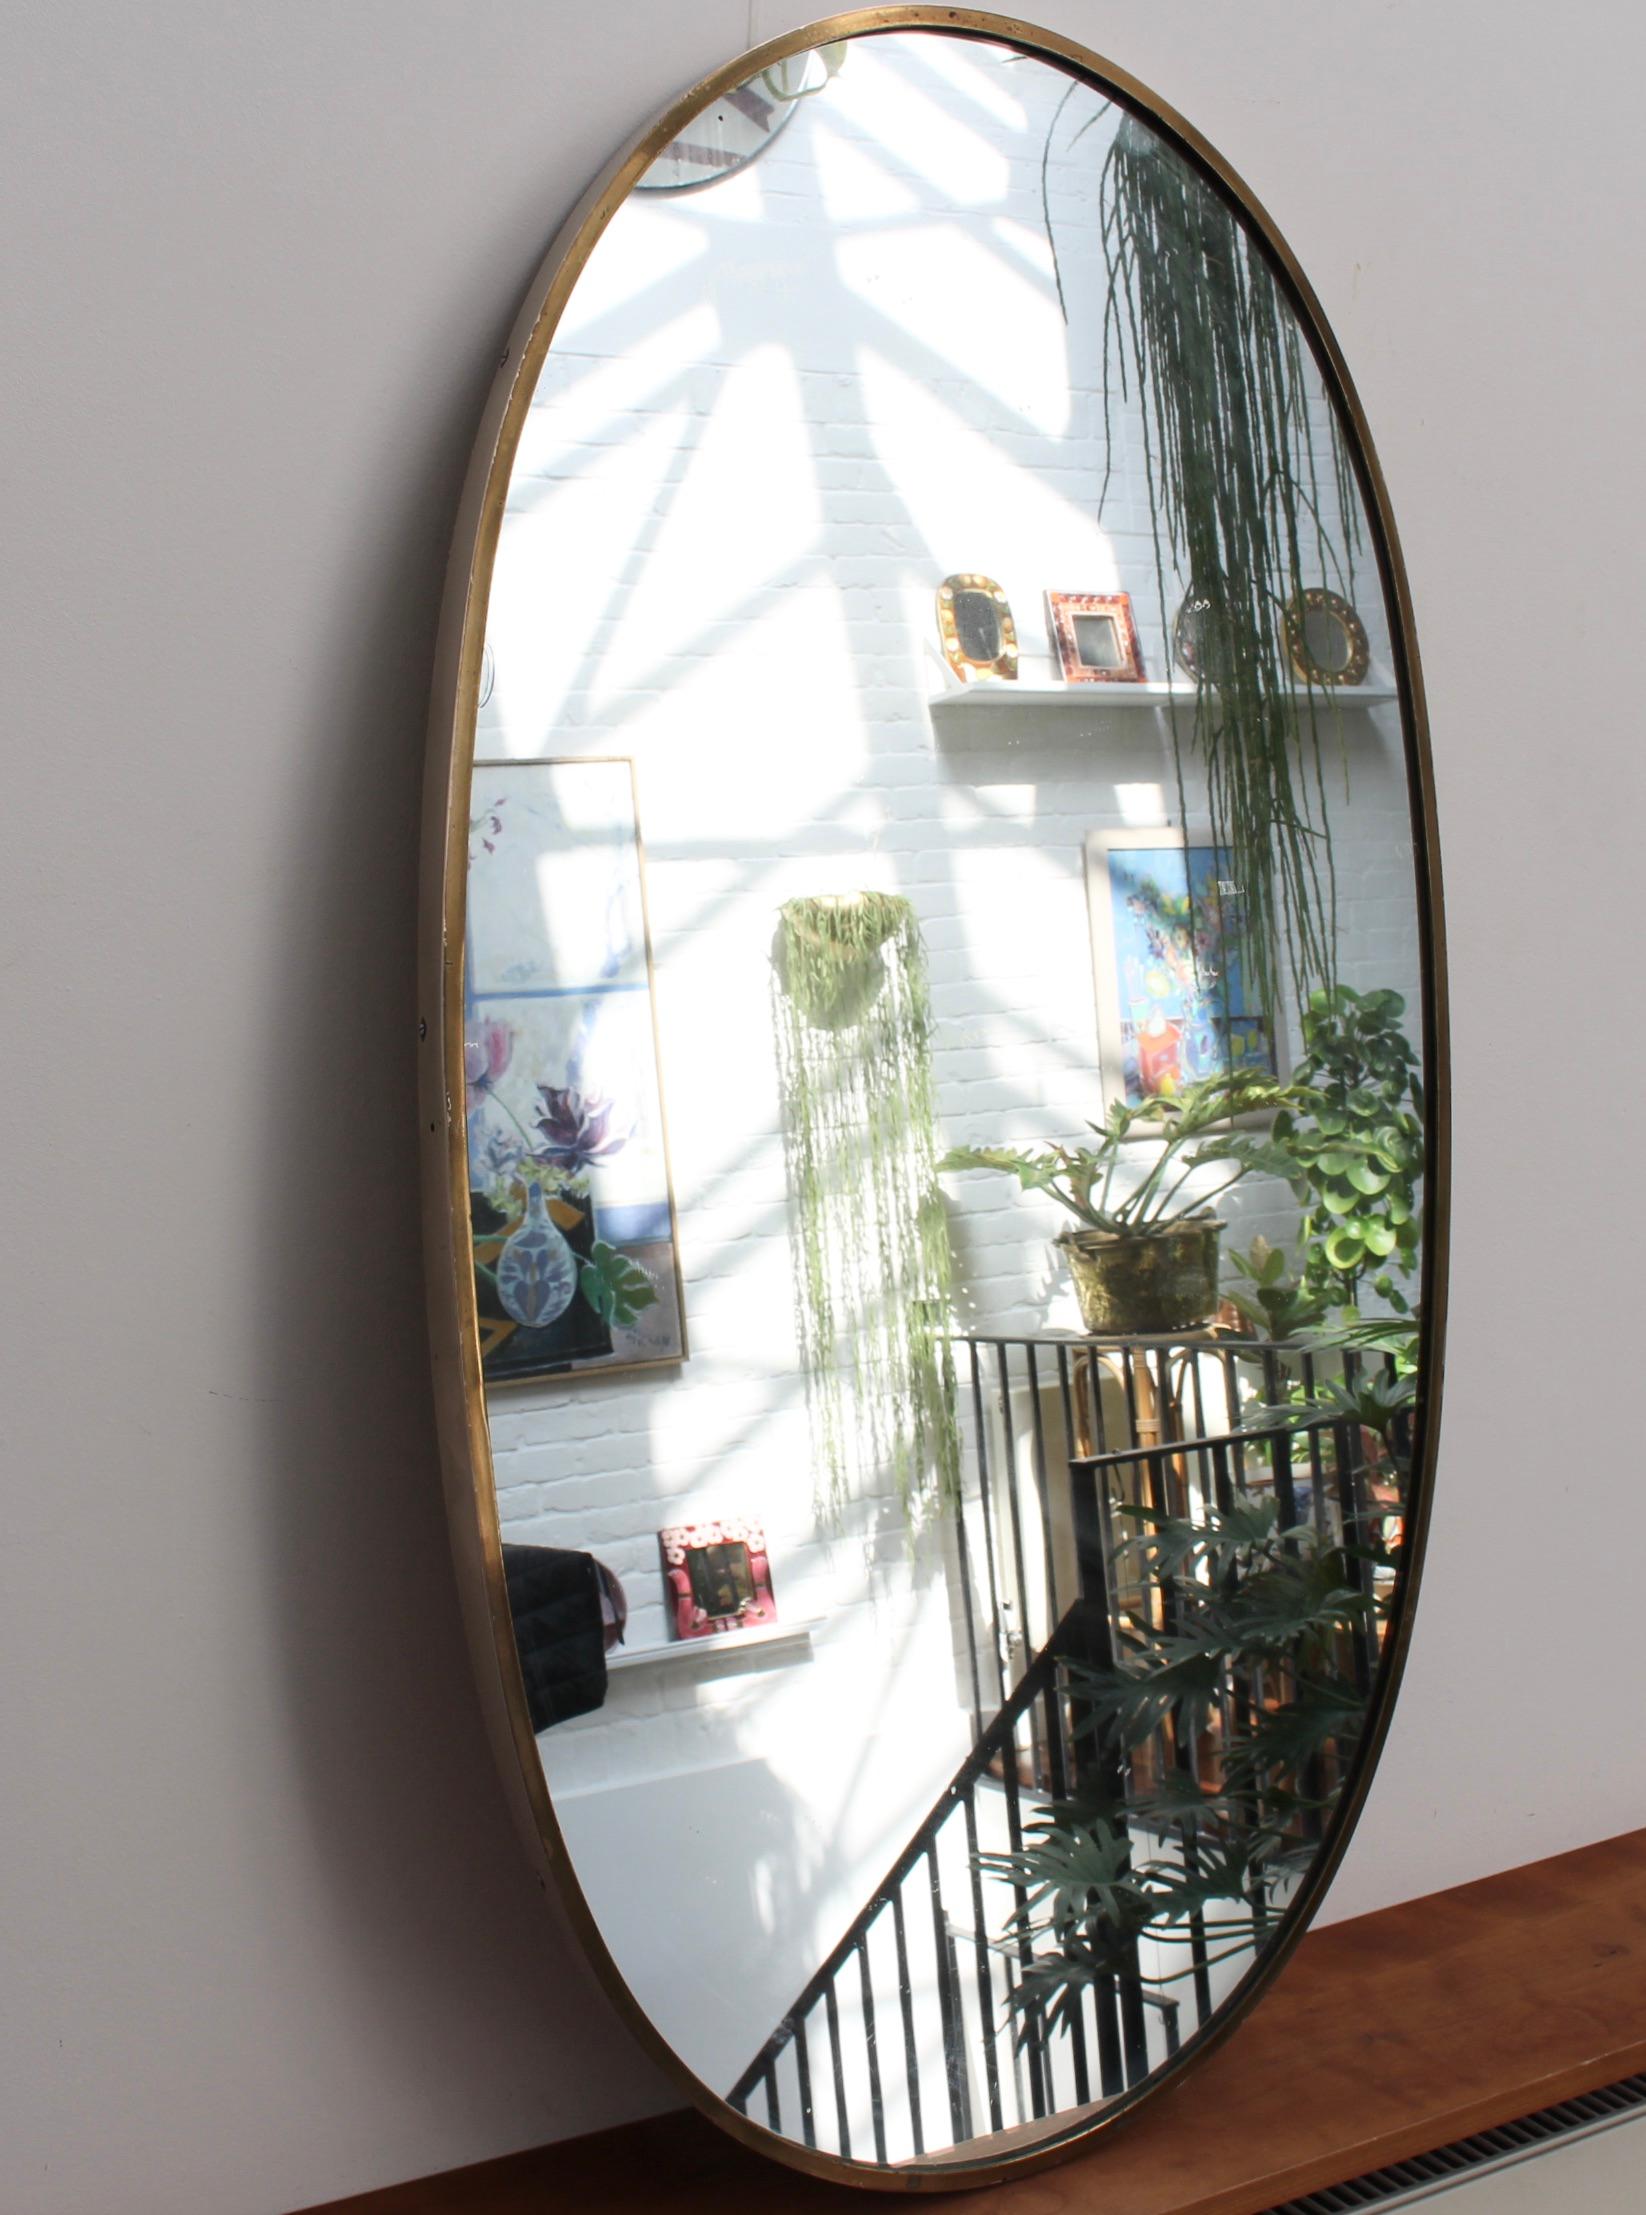 Mid-century Italian wall mirror with brass frame, (circa 1950s). A very sizeable and weighty oval mirror which has retained its smartness coupled with an irresistible charm. The visual impression is elegant and very distinctive in a modern Gio Ponti